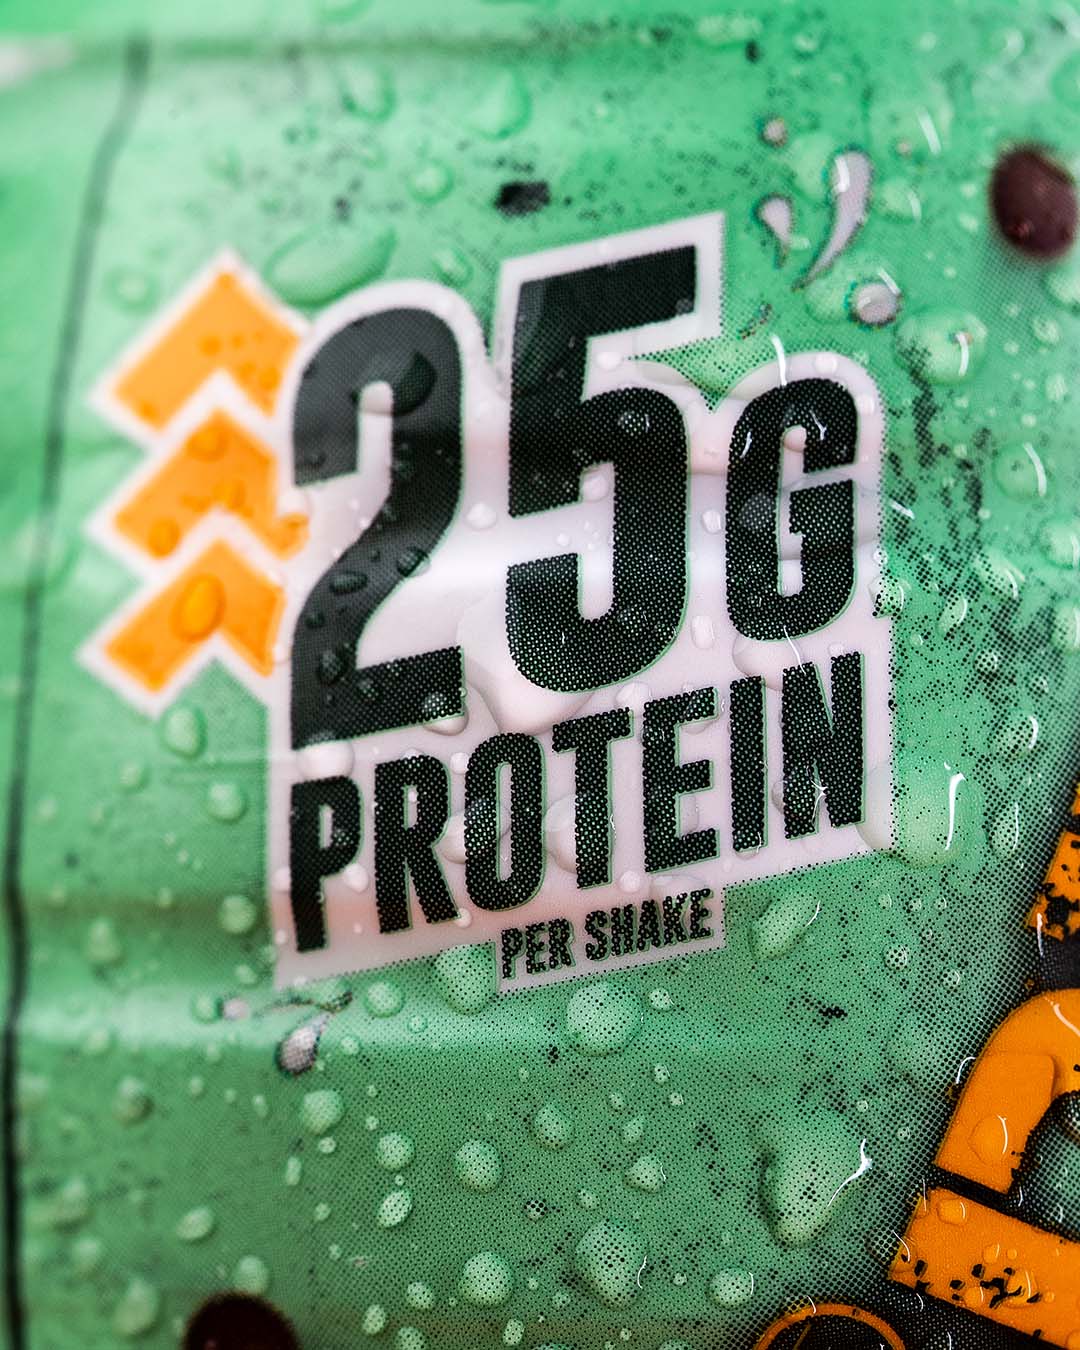 Text reads "25g protein per shake"